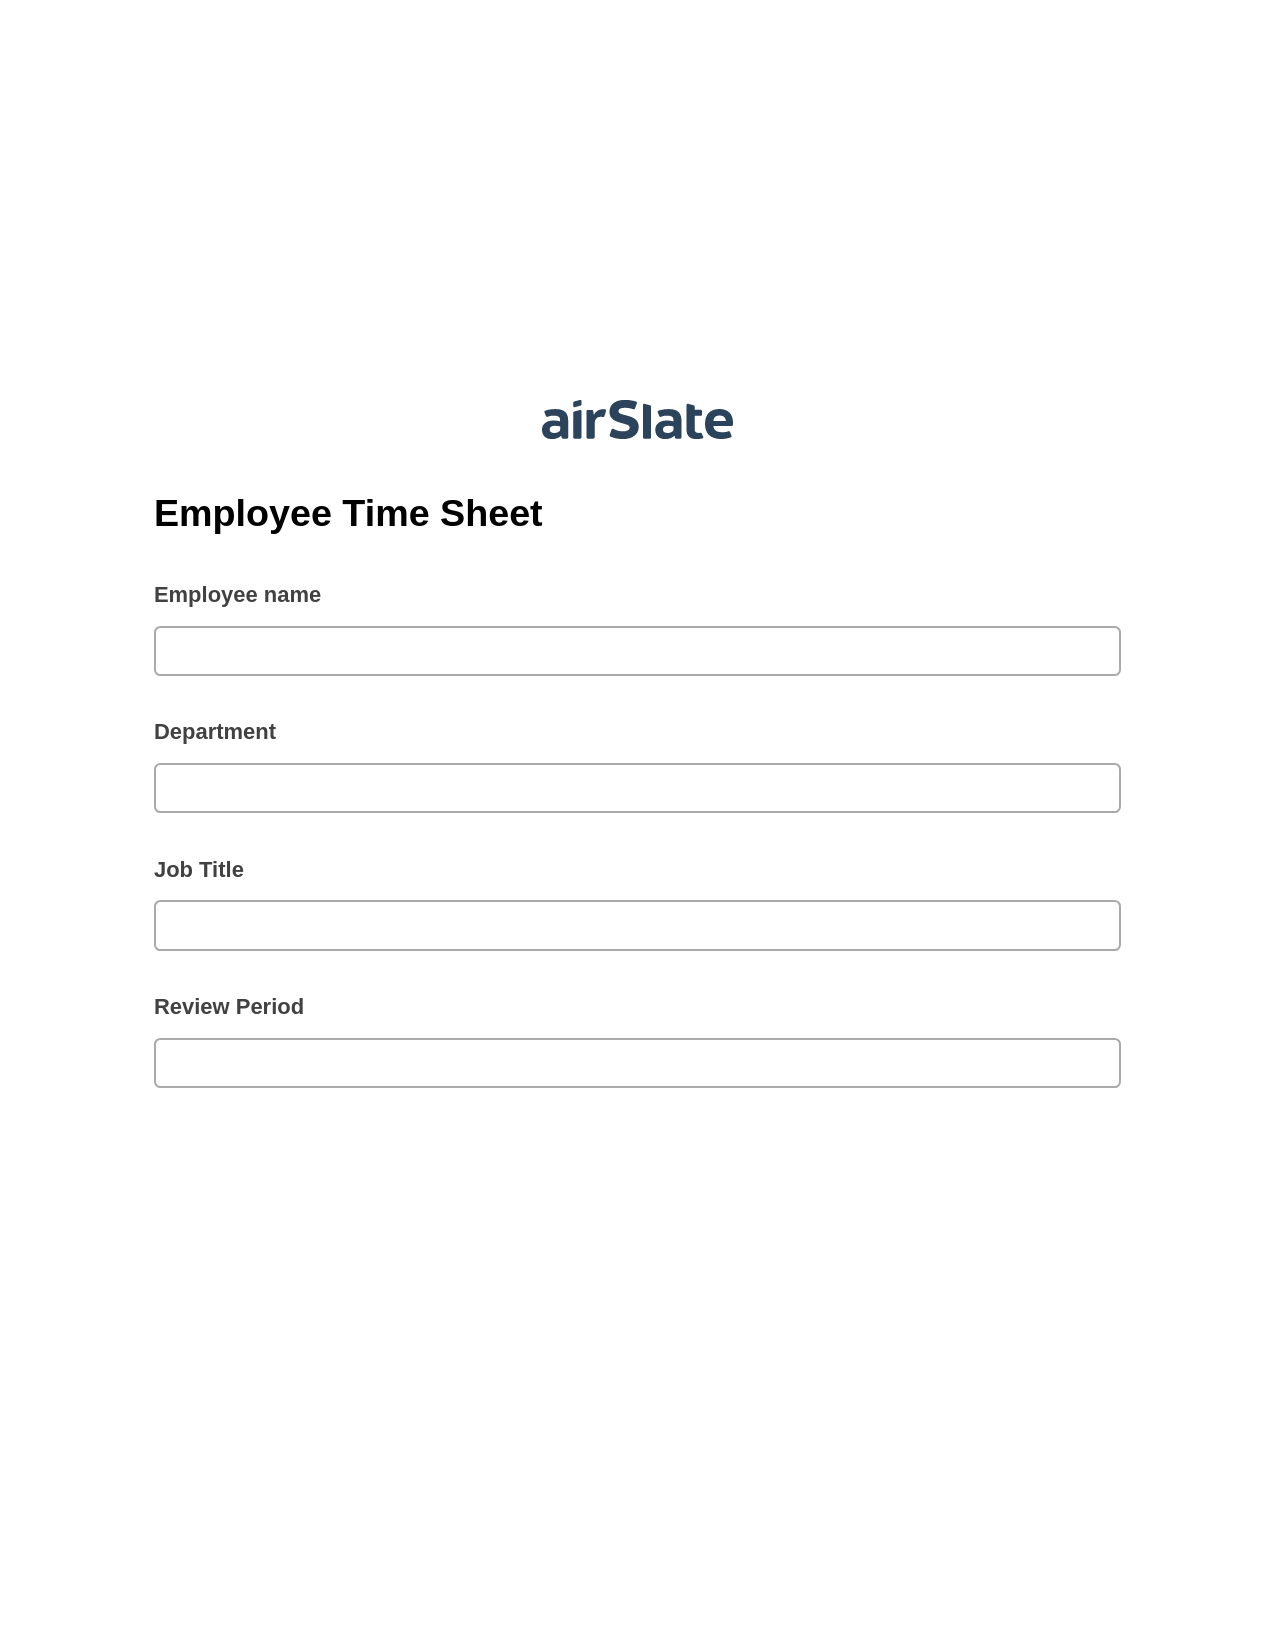 Employee Time Sheet Pre-fill from MS Dynamics 365 Records, Create Salesforce Records Bot, Email Notification Postfinish Bot